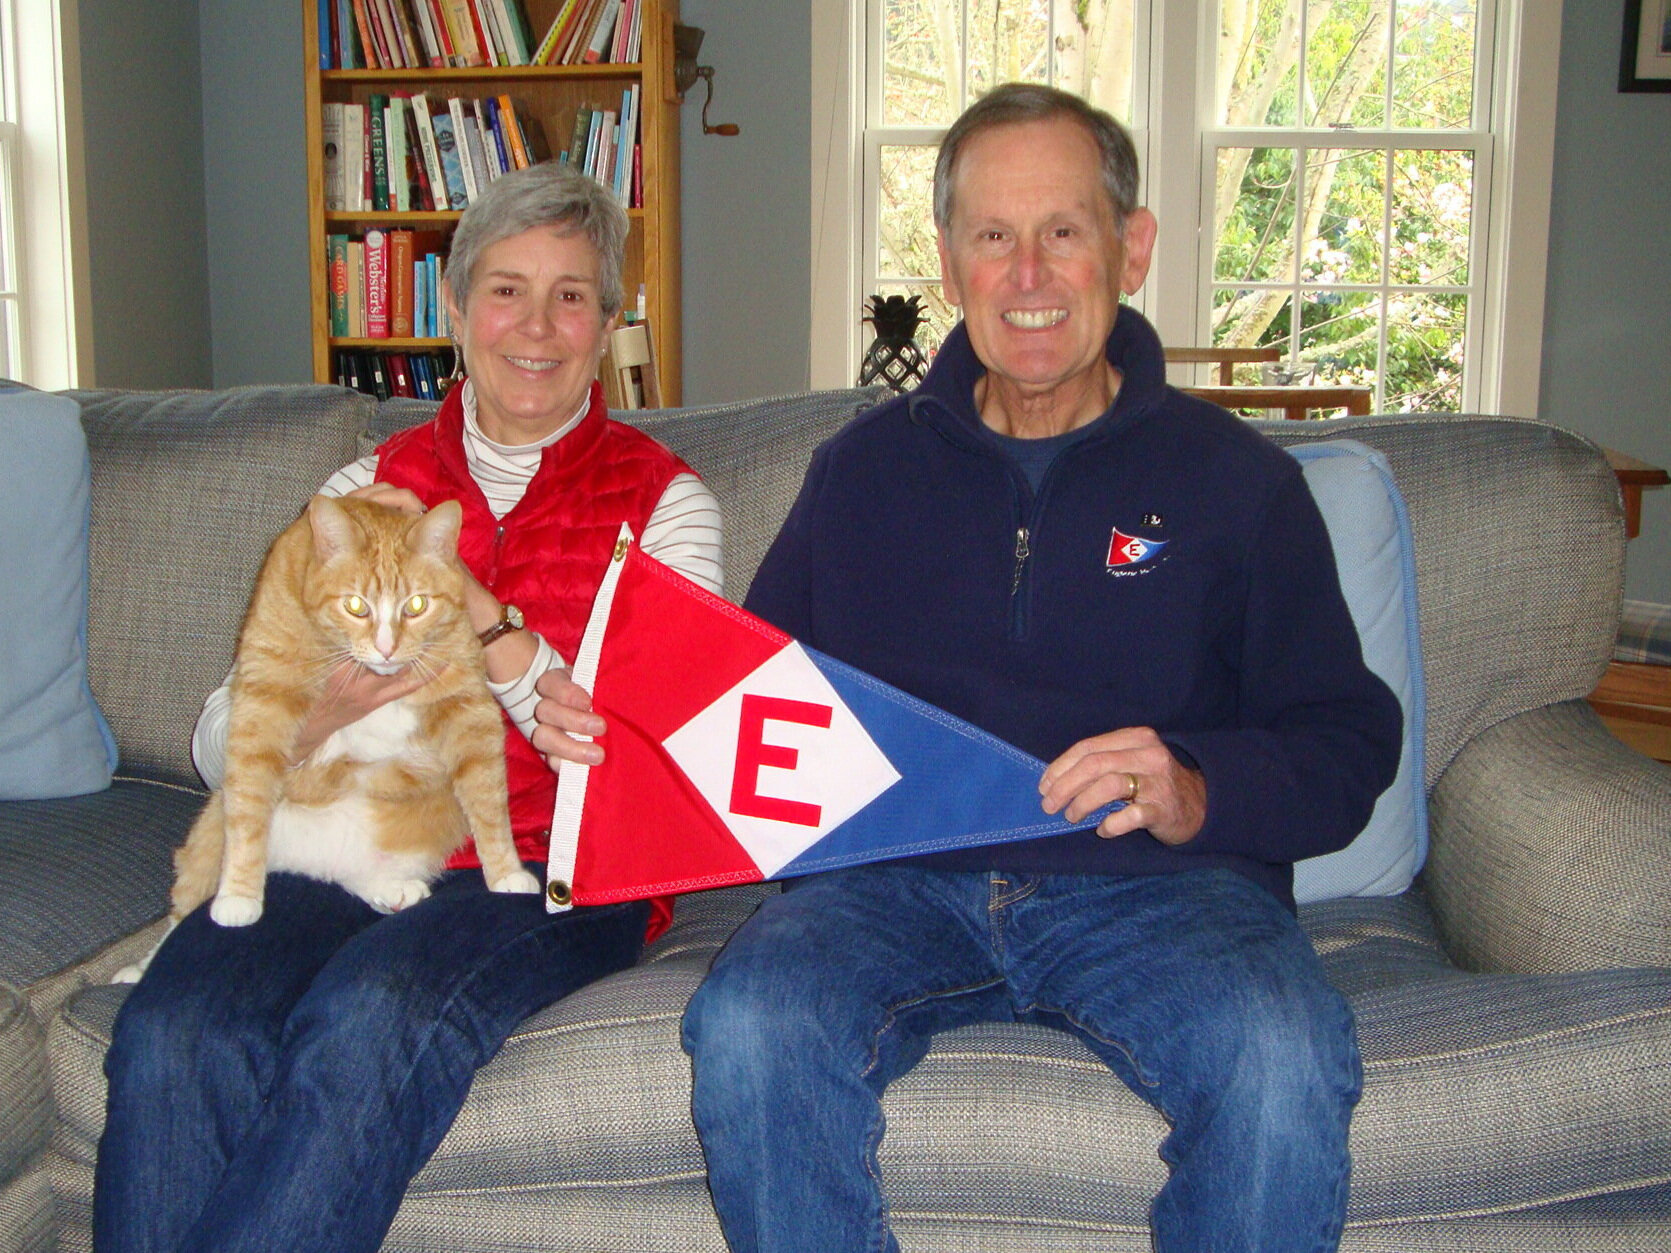  Jane and Gary show the colors while sheltering in place 